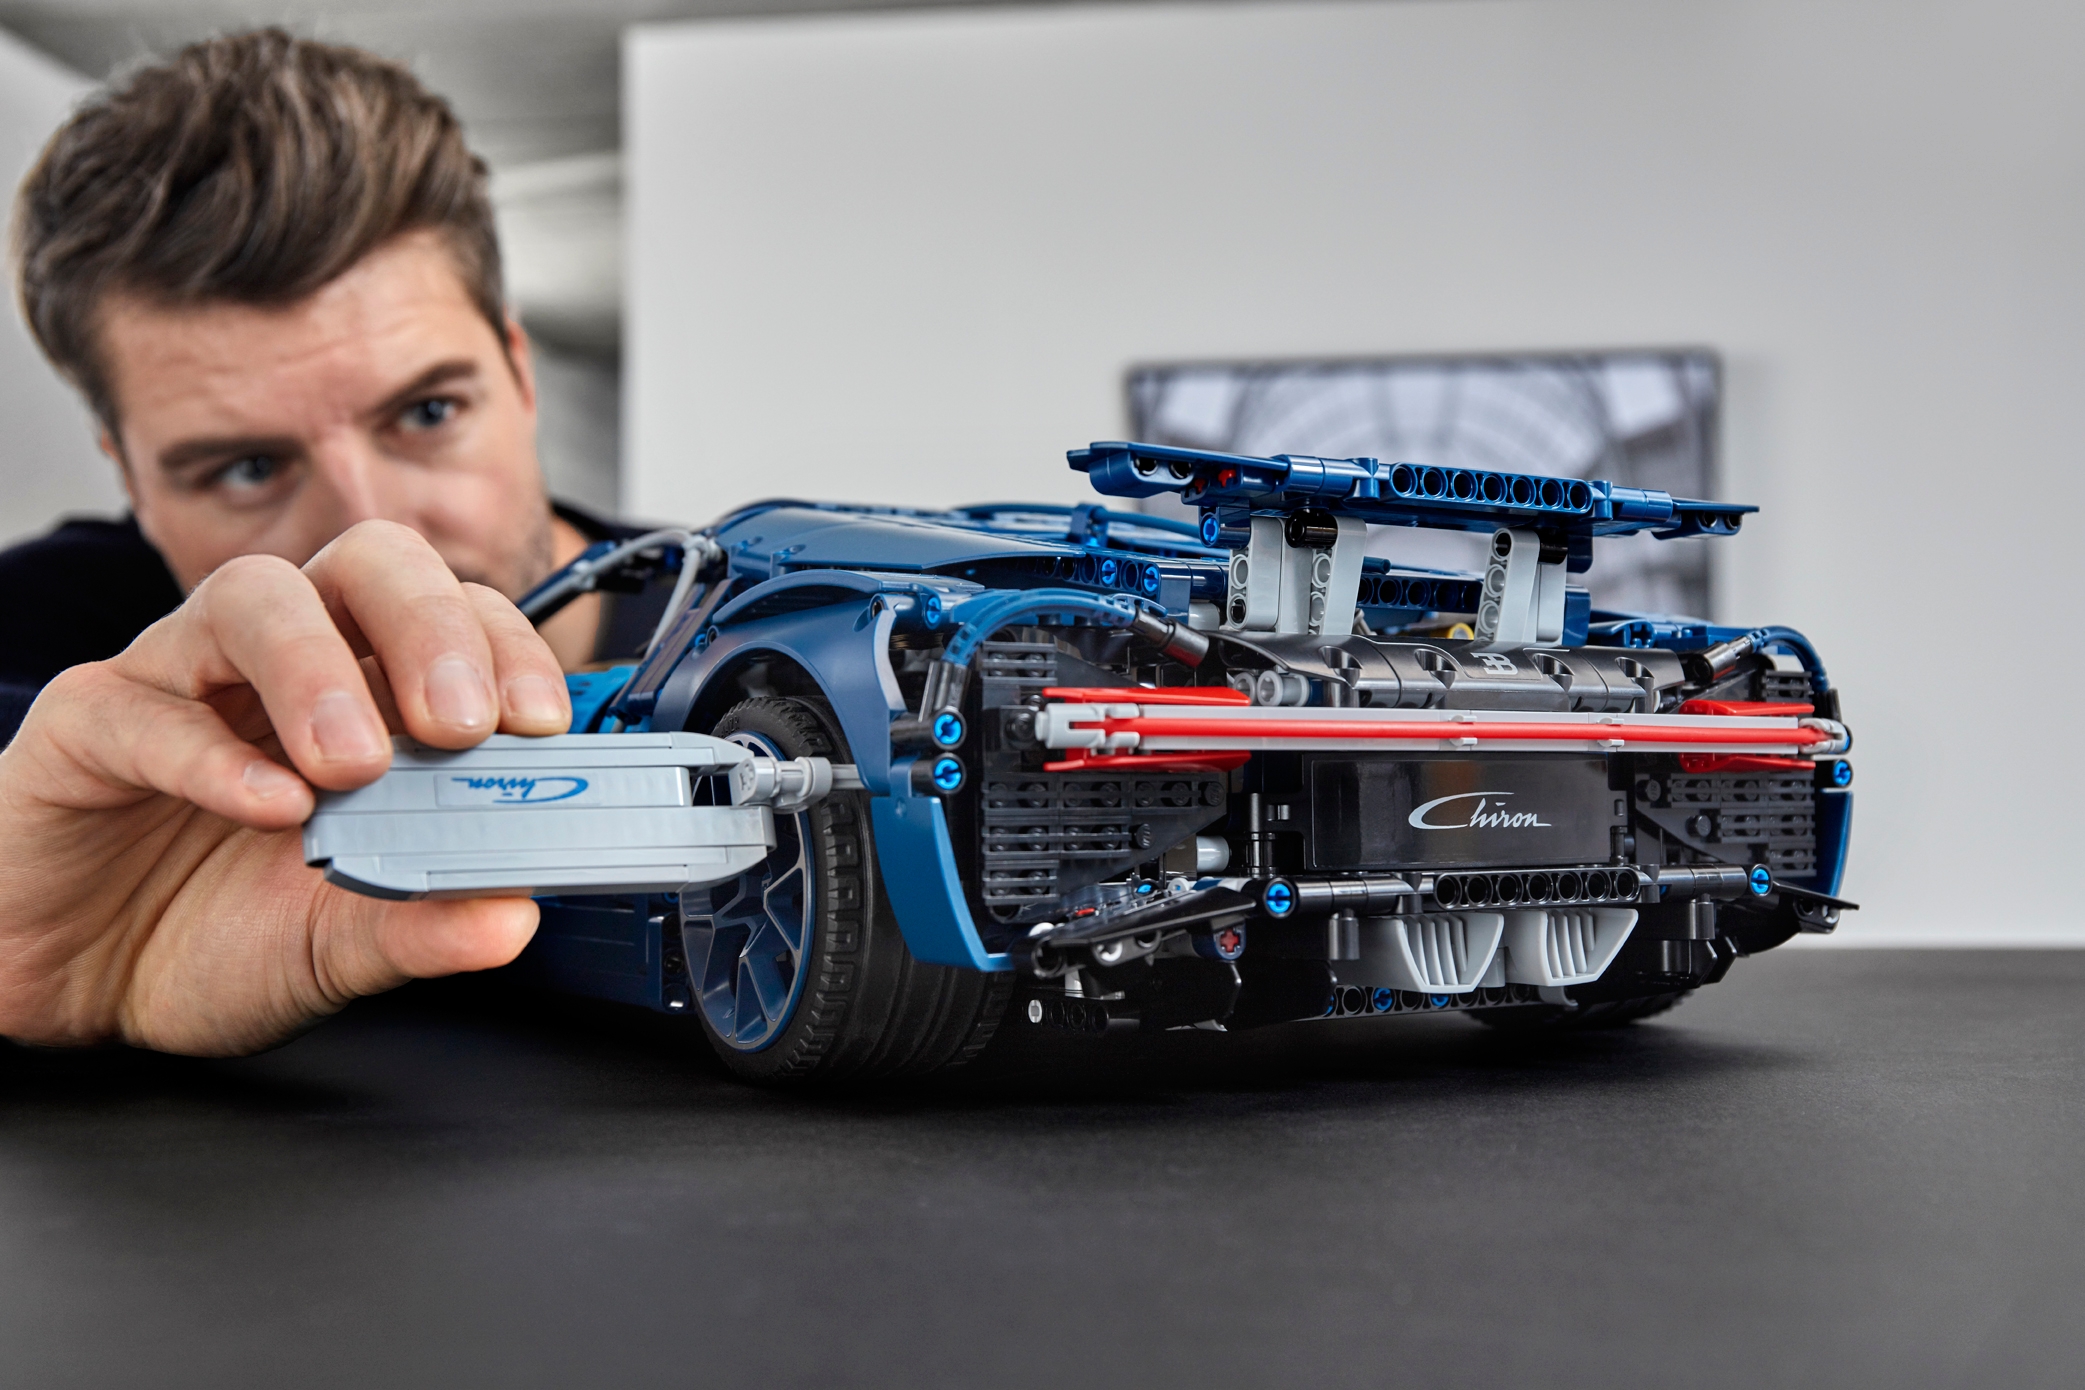  Motor and Remote Control Set for Lego Technic Bugatti Chiron  42083 Race Car Kit, Set Compatible with Lego 42083 (Model Not Included) :  Toys & Games